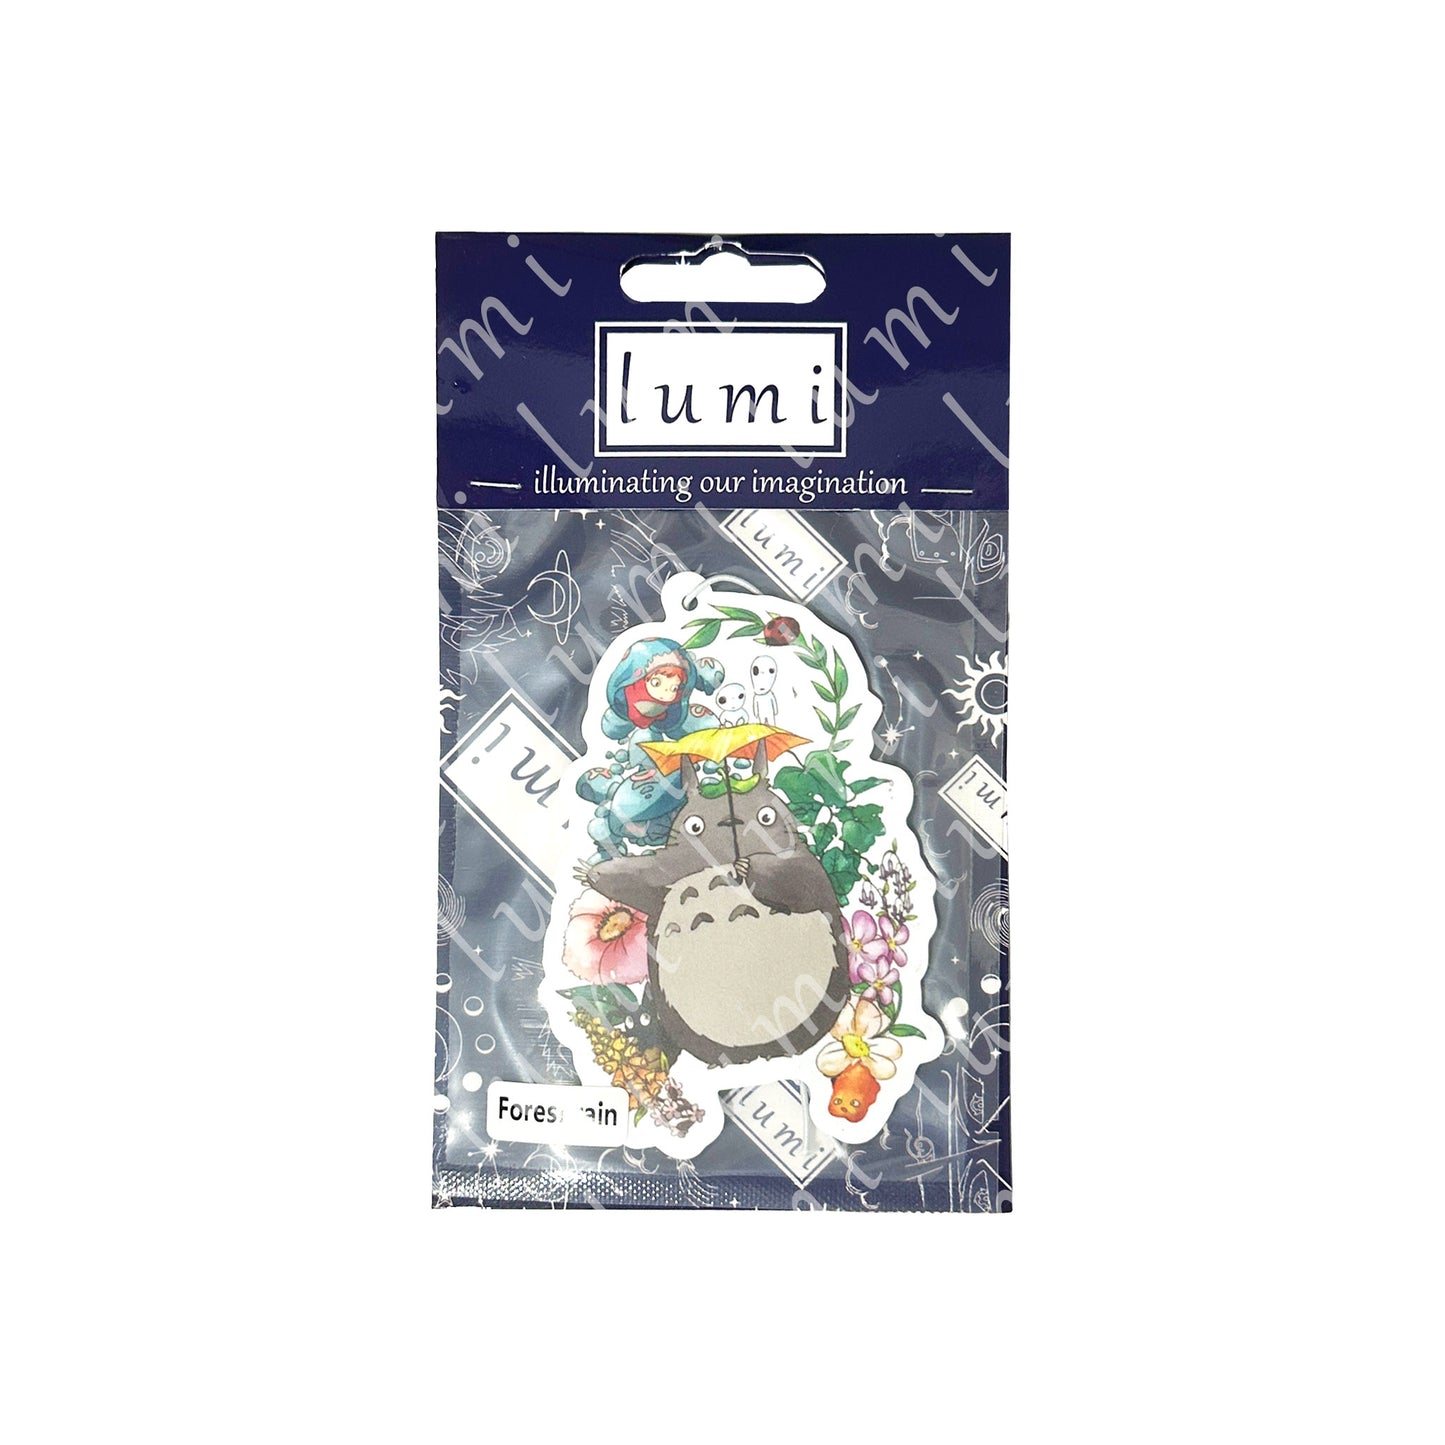 Image of a Kawaii Studio Ghibli Air Freshener featuring Totoro, Calcifer, Ponyo, Kodama, and Jiji characters. A delightful addition to your space, both visually and aromatically.